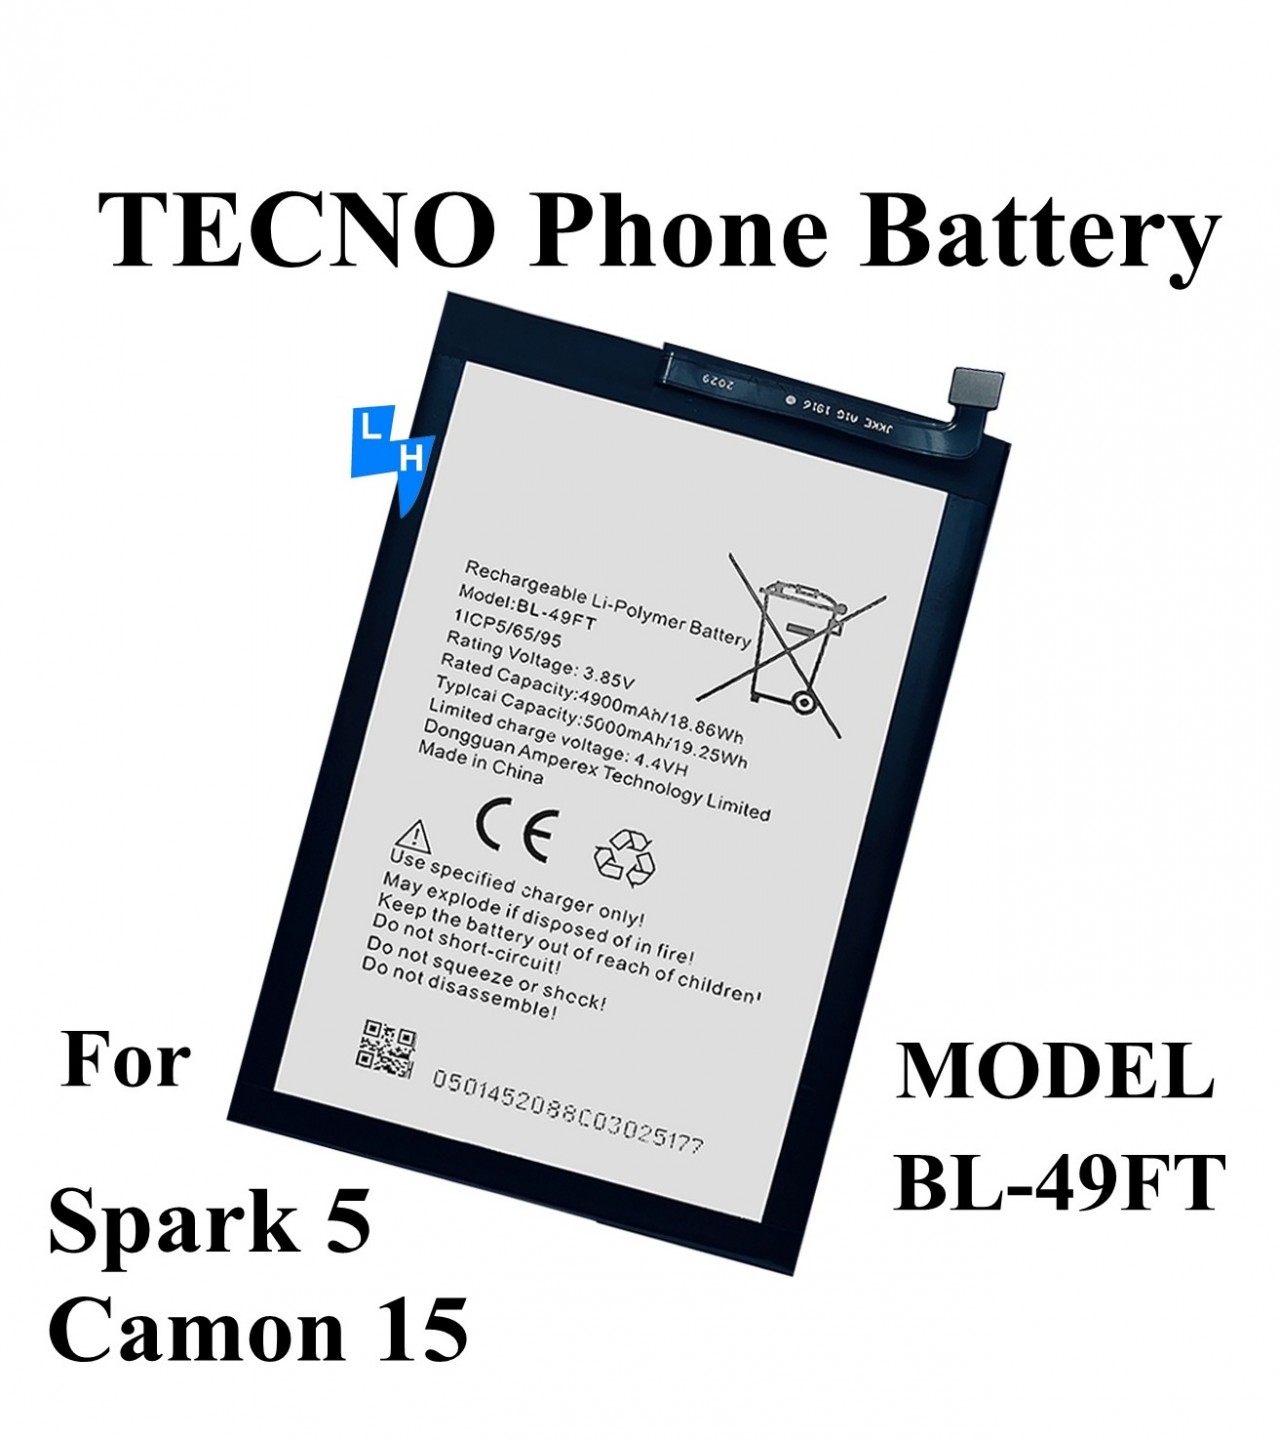 TECNO BL-49FT Battery Replacement For SPARK 5_Camon 15 Pro with 5000mAh Capacity-Black